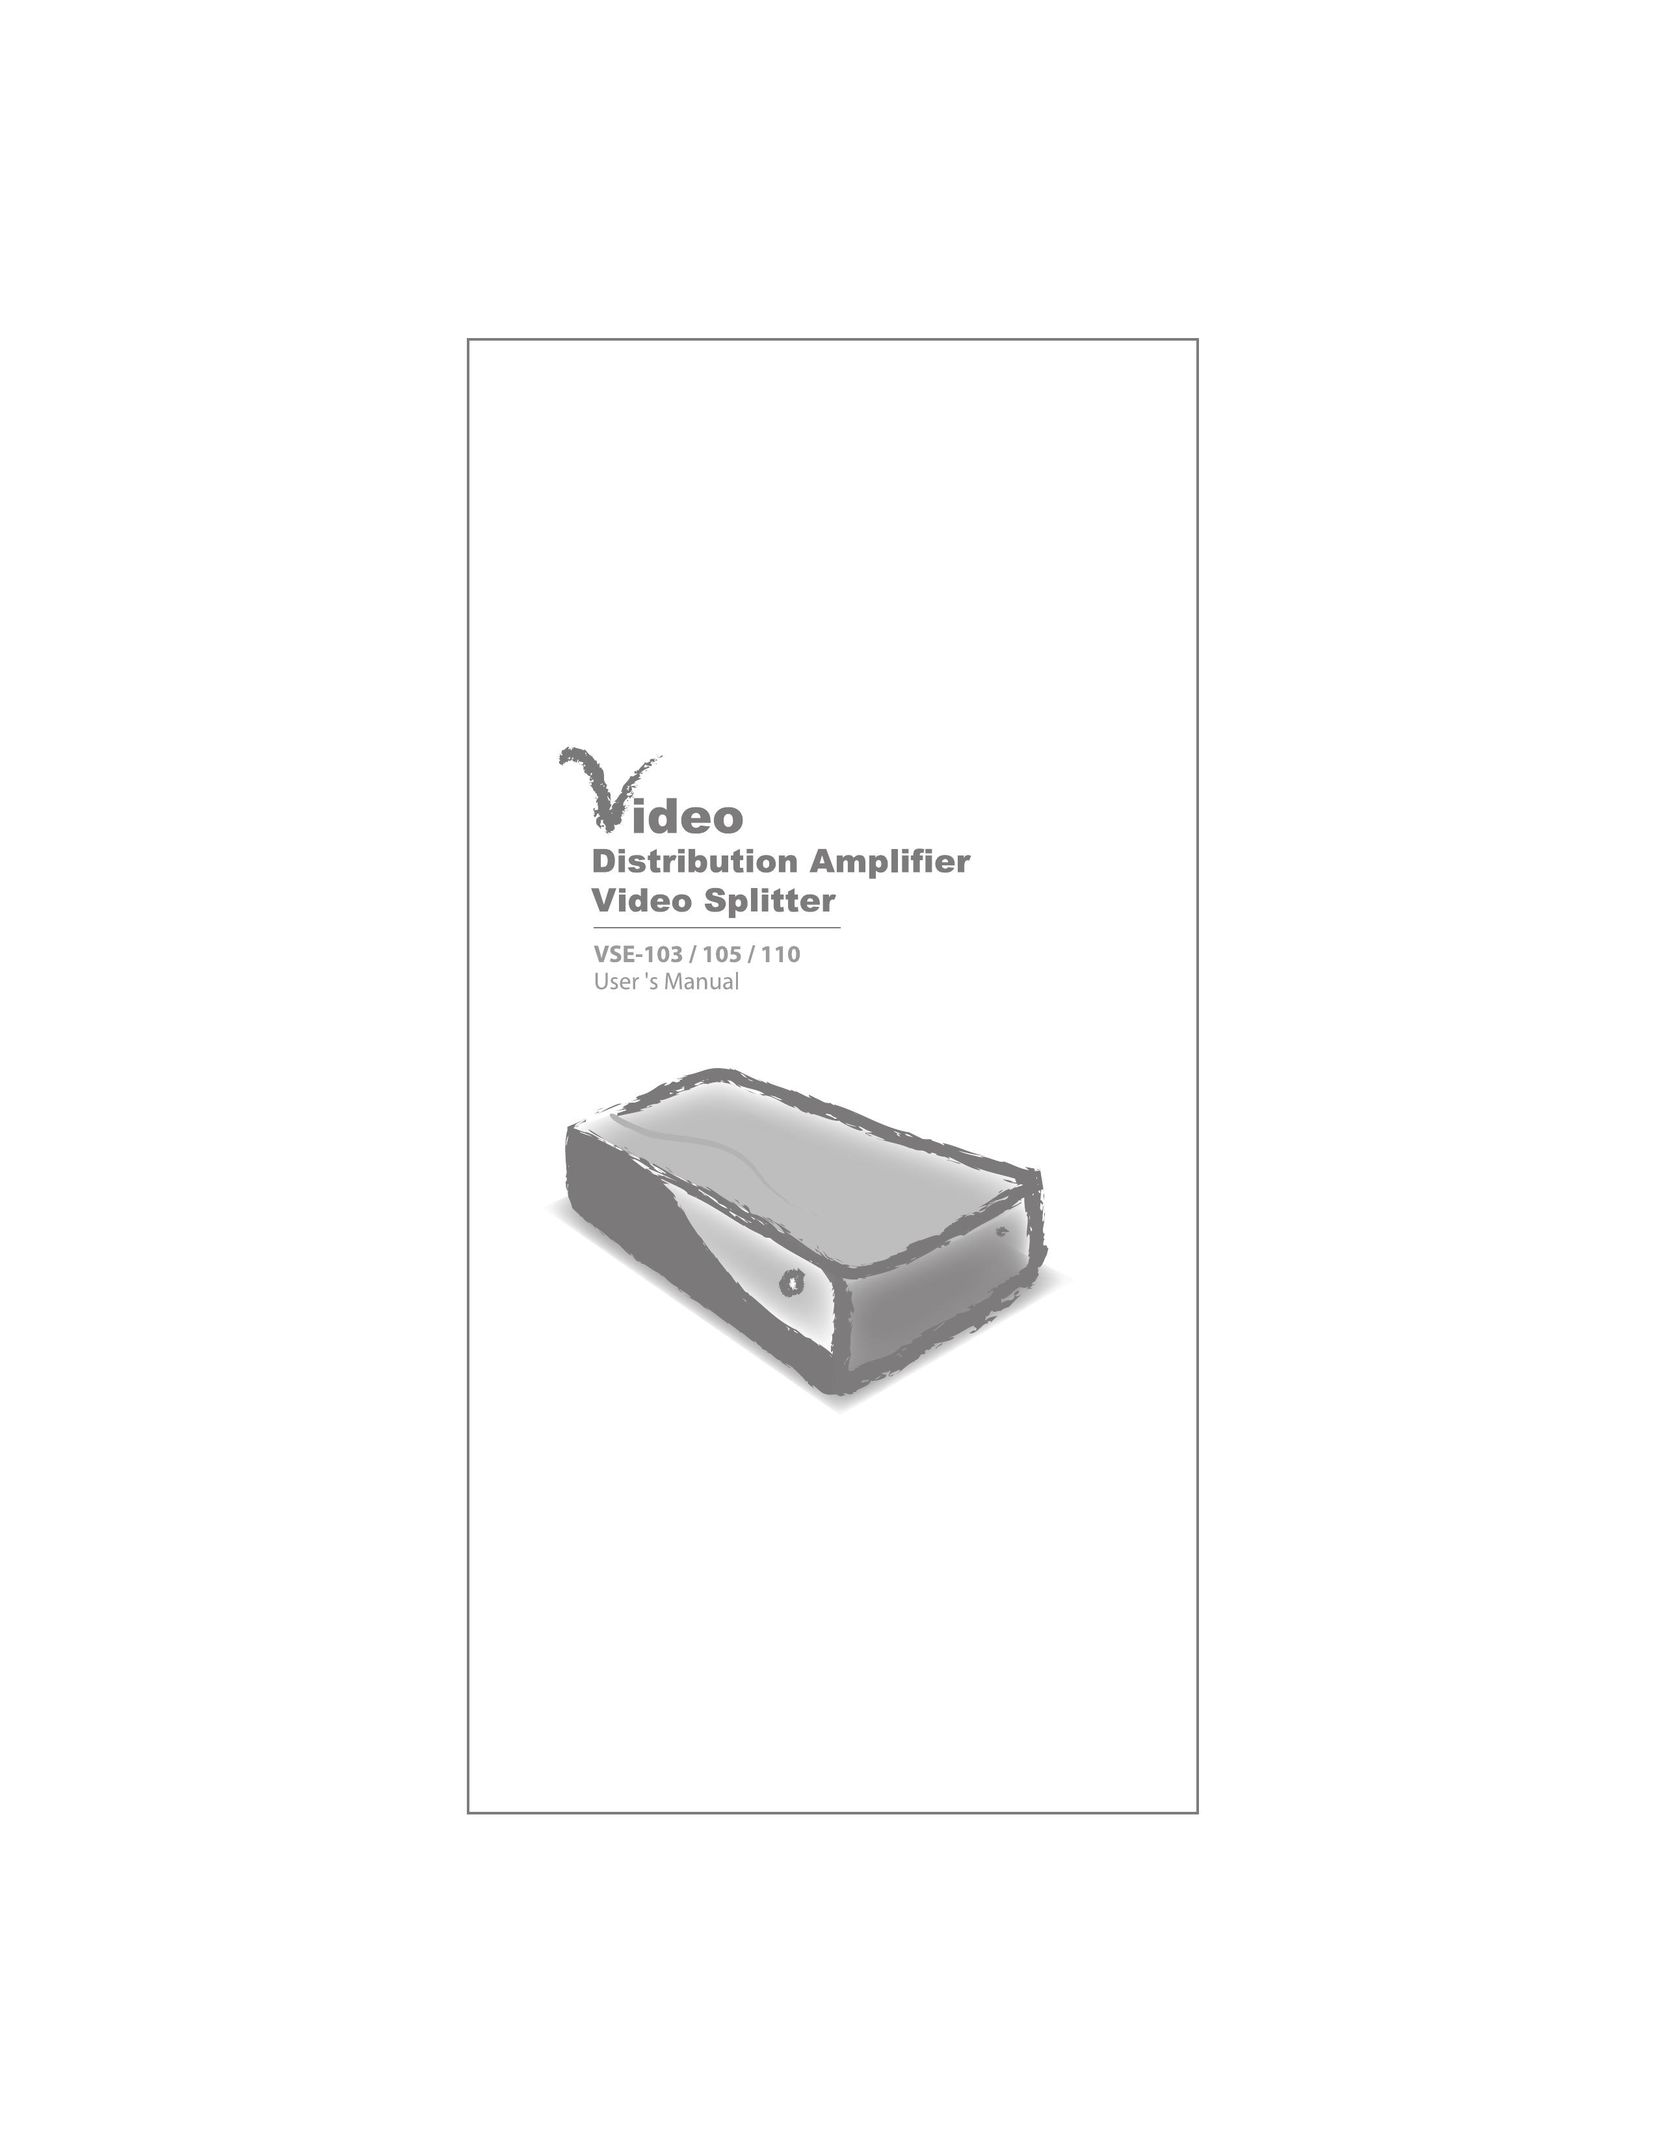 ConnectPRO VSE105 Switch User Manual